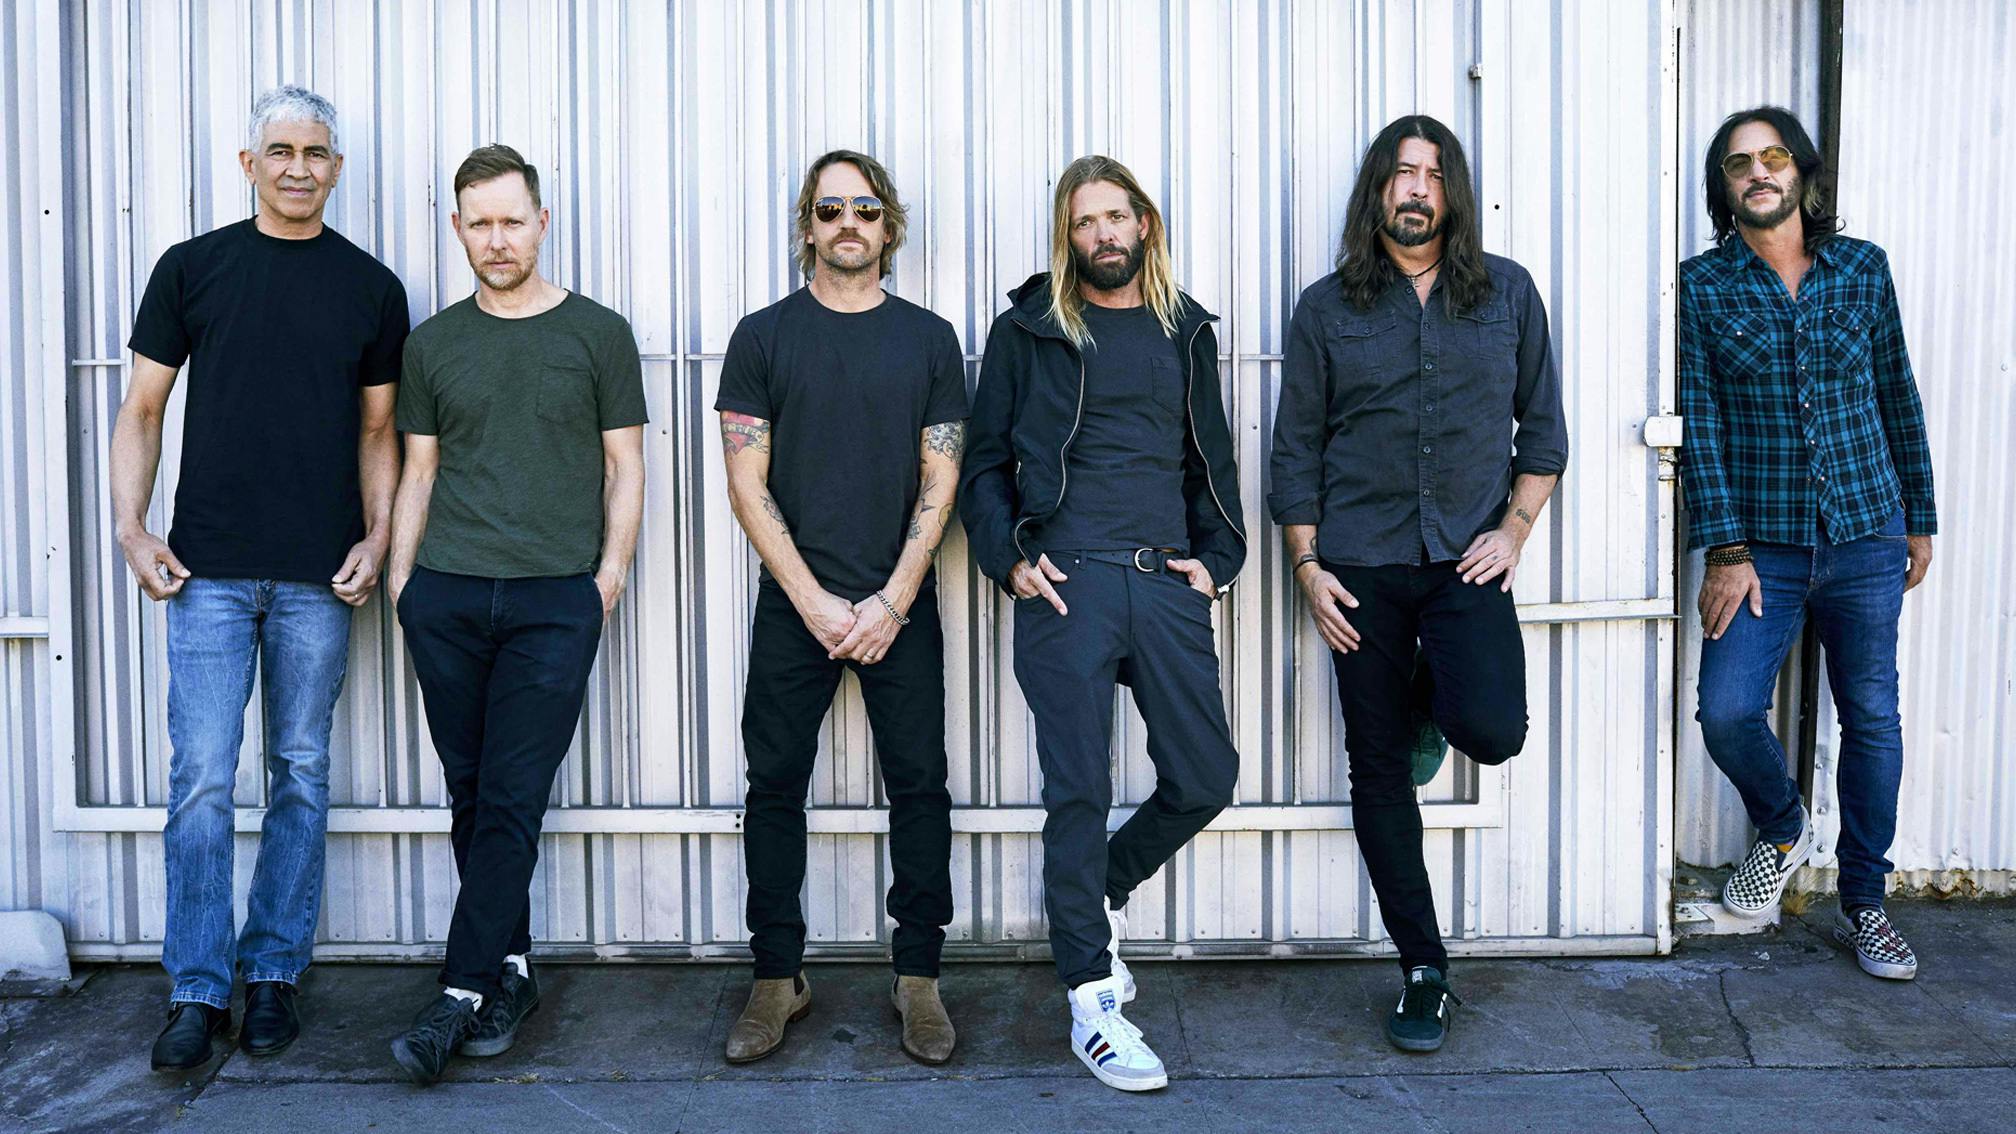 Dave Grohl discusses Foo Fighters' inclusion in the 2021 Rock & Roll Hall Of Fame